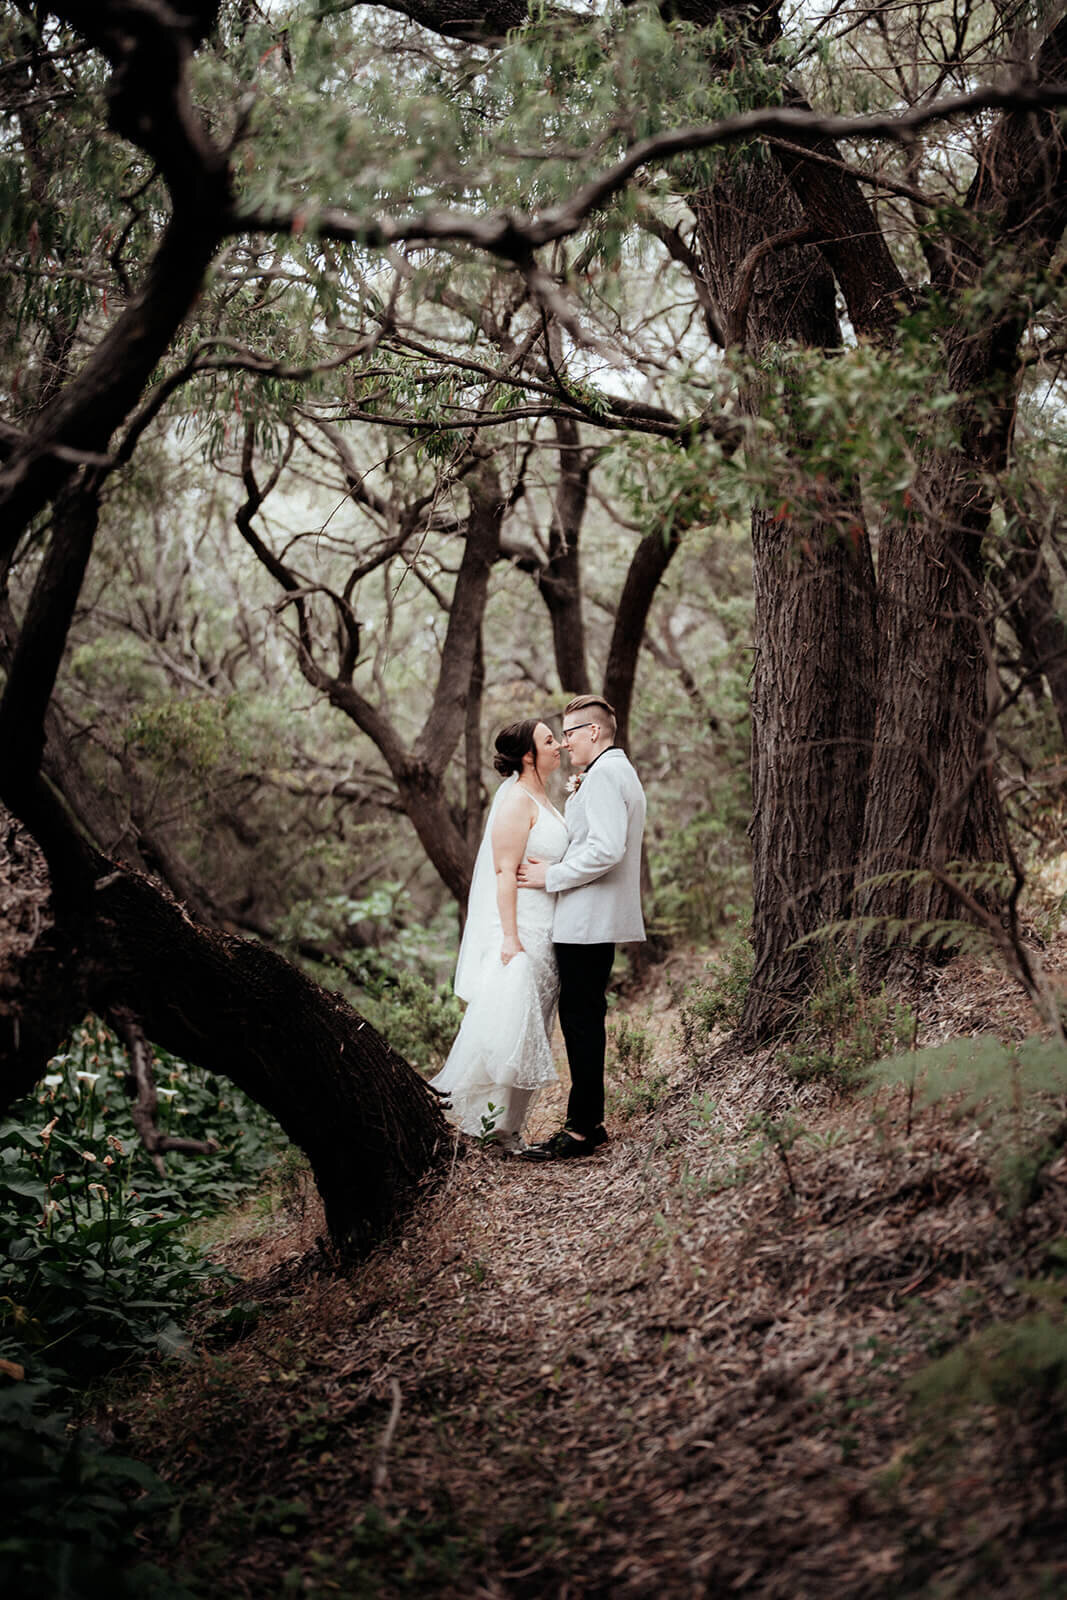 Wedding portrait of two brides kissing under trees